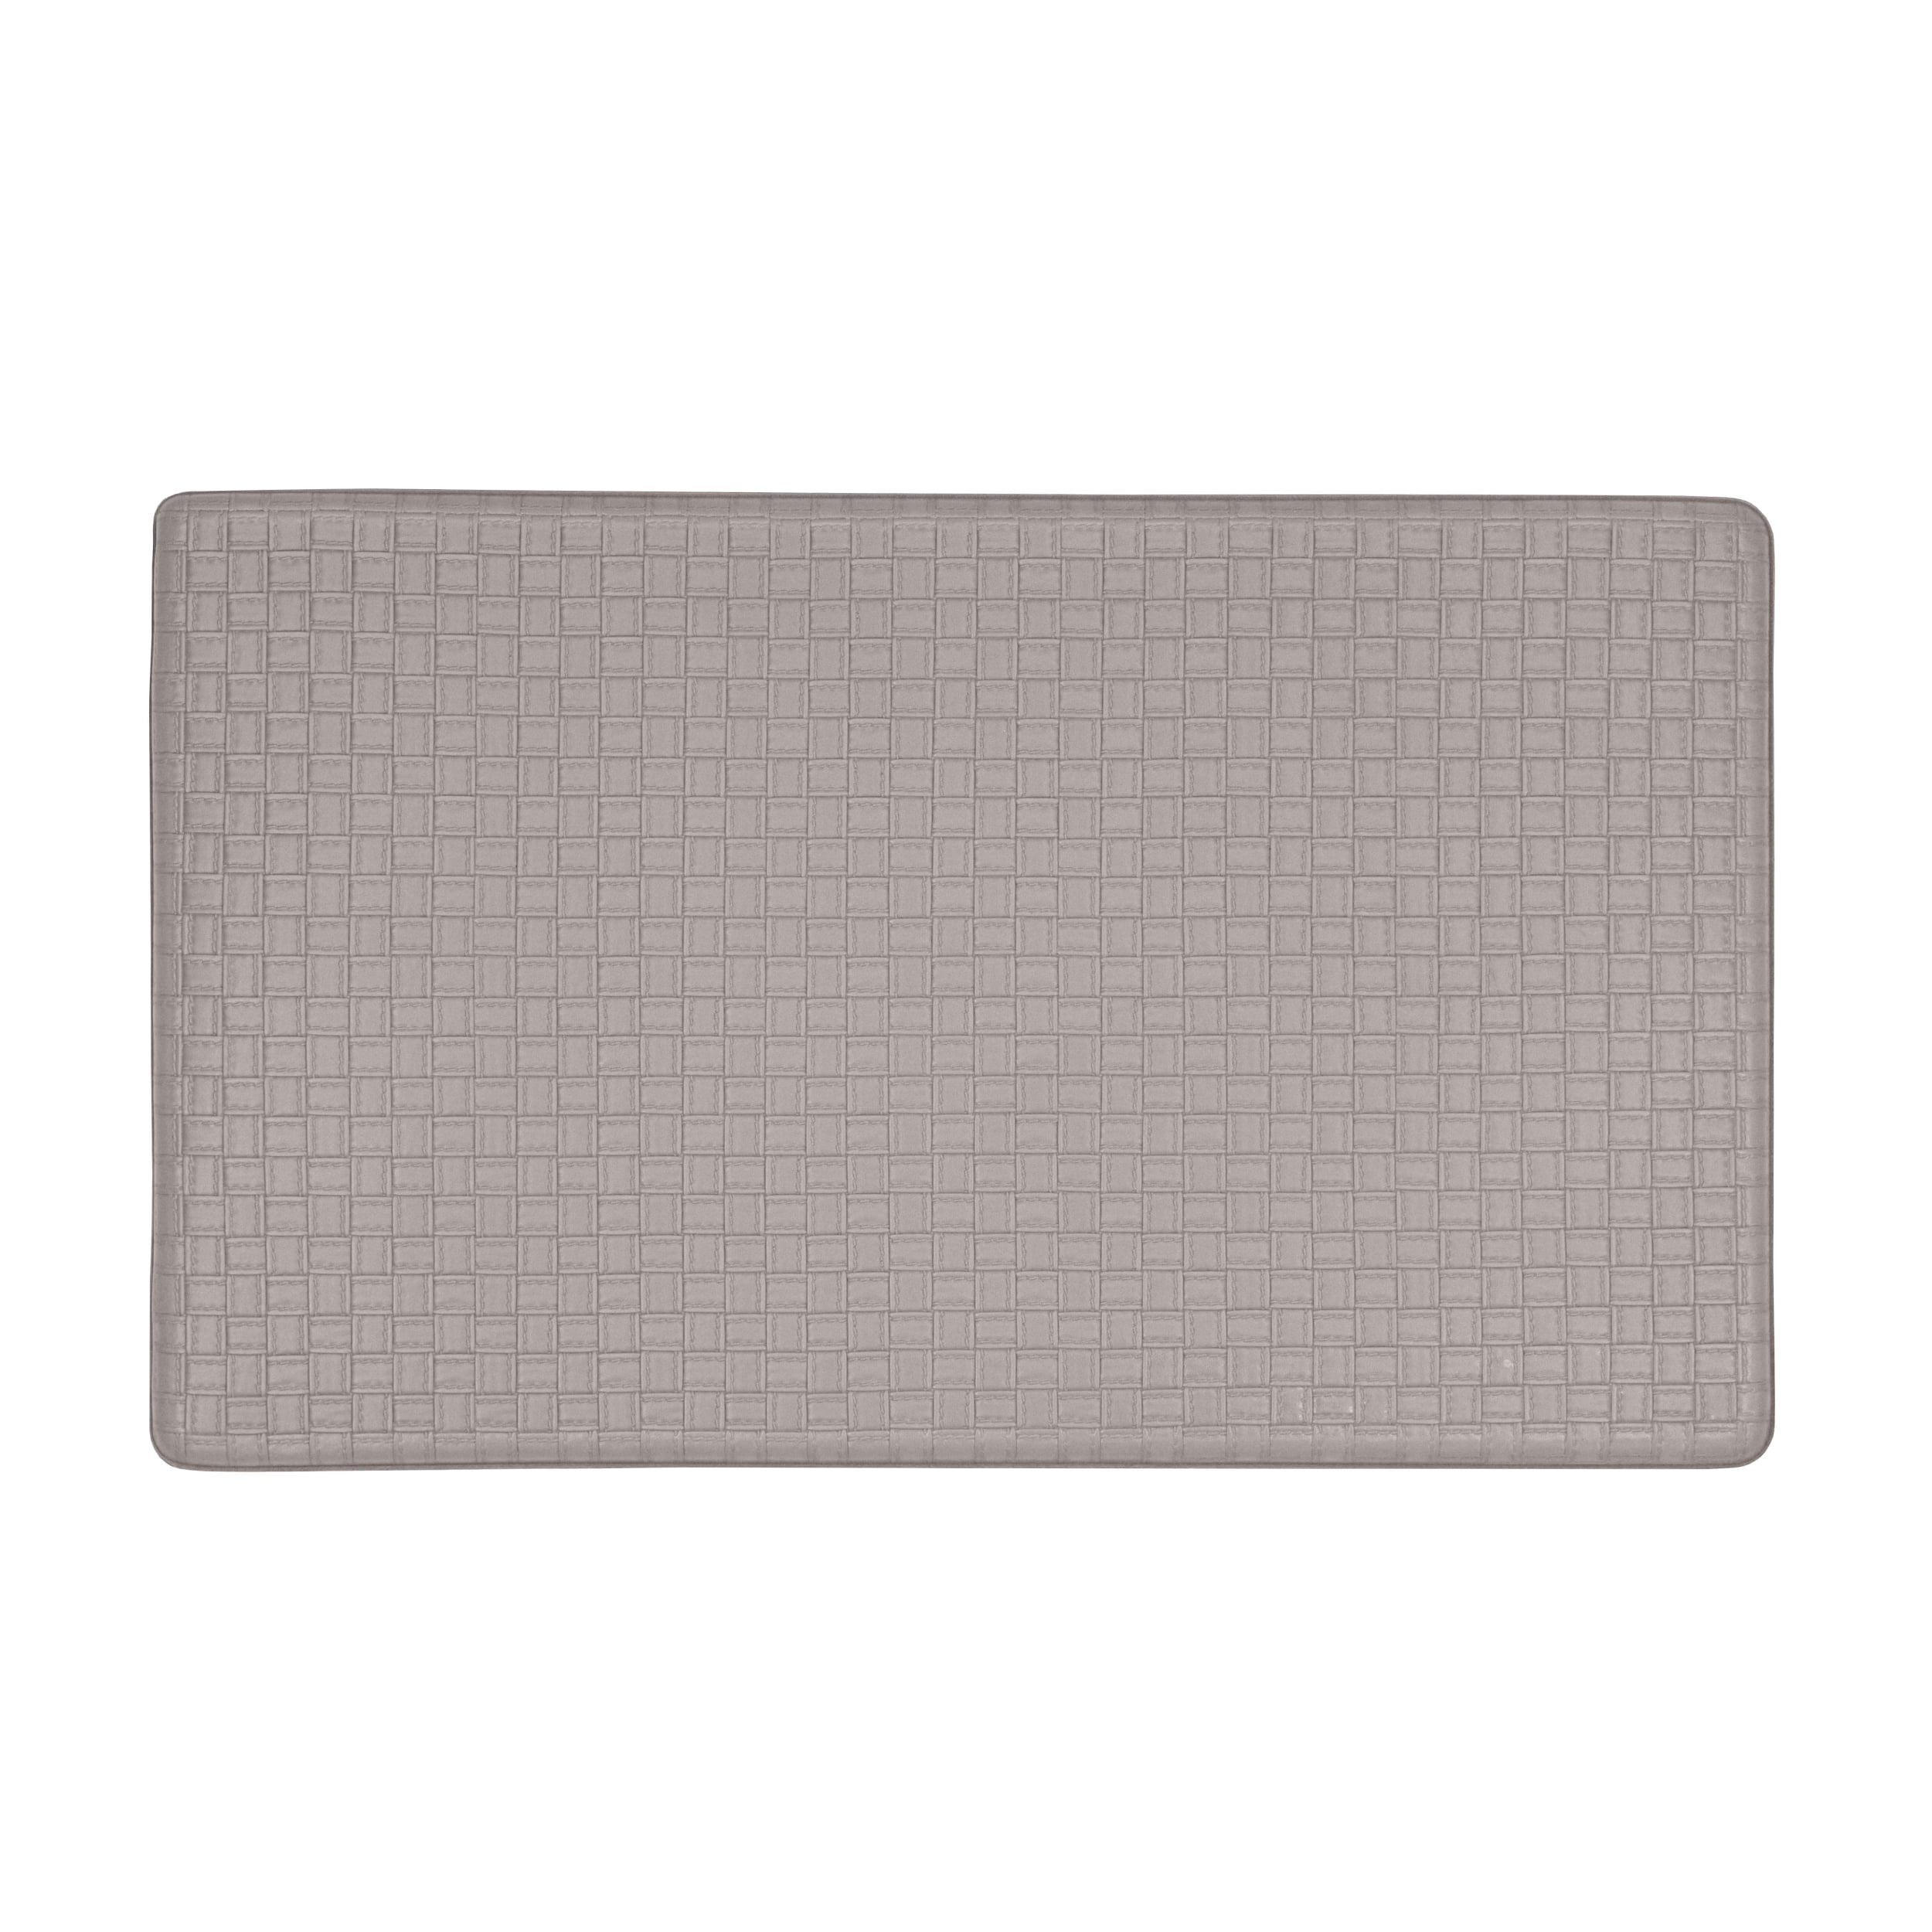 Picture of Achim AF1830GY12 18 x 30 in. Woven-Embossed Faux-Leather Anti-Fatigue Mat, Grey